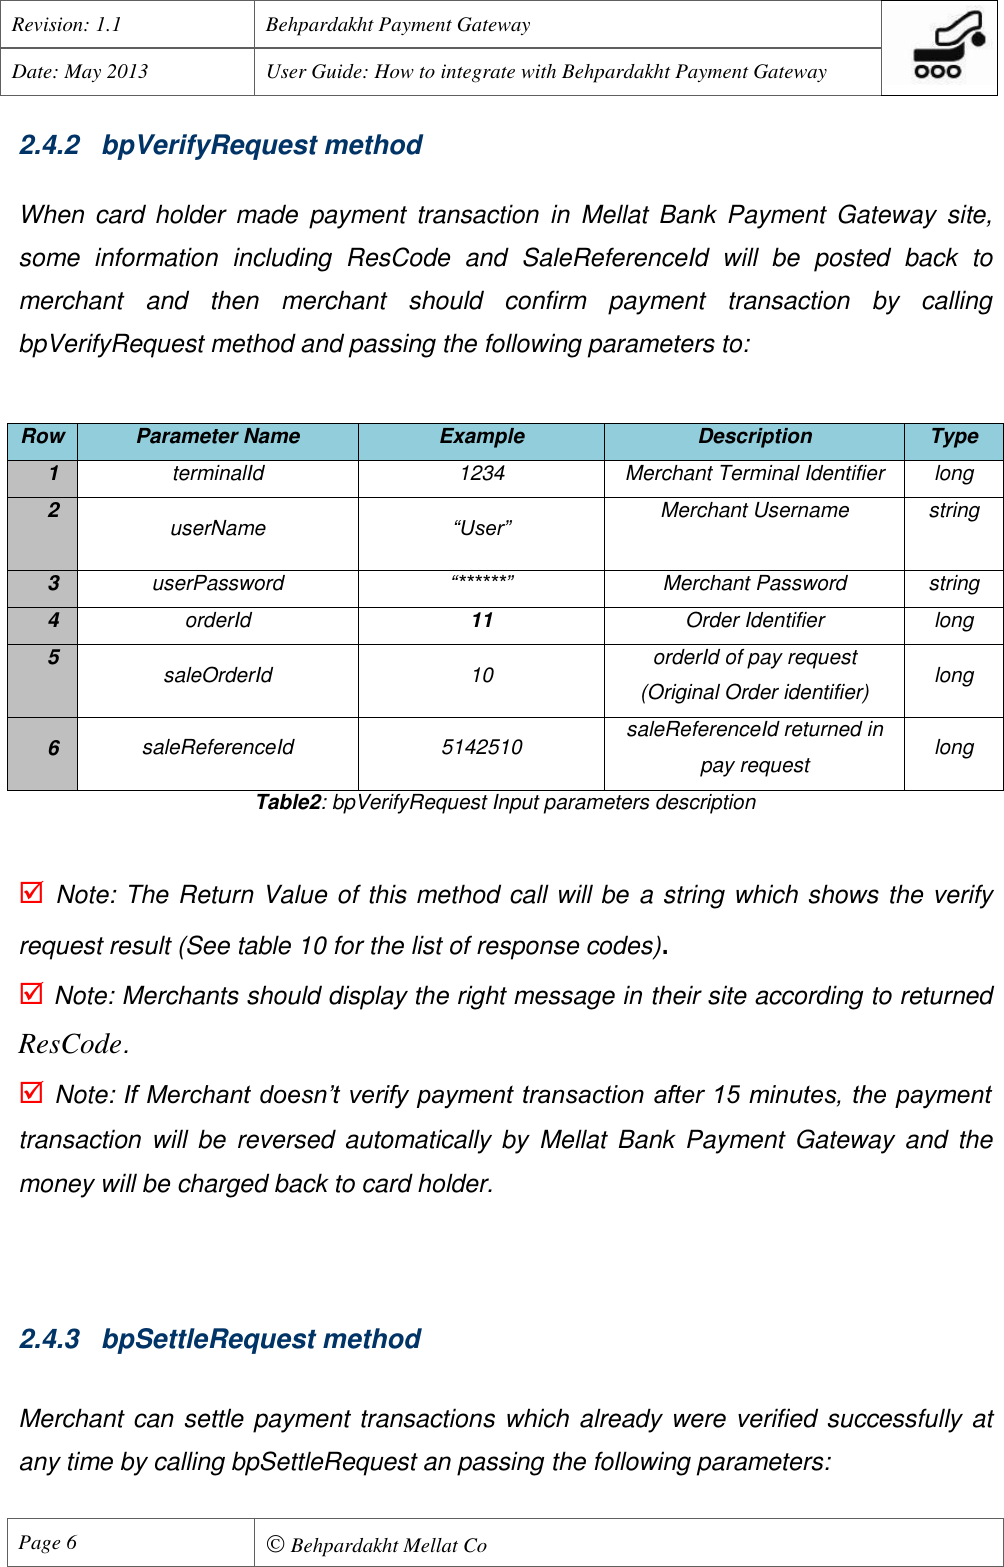 Page 7 of 11 - Behpardakht Mellat - Payment Gateway PGW User Manual English Ver 1.1